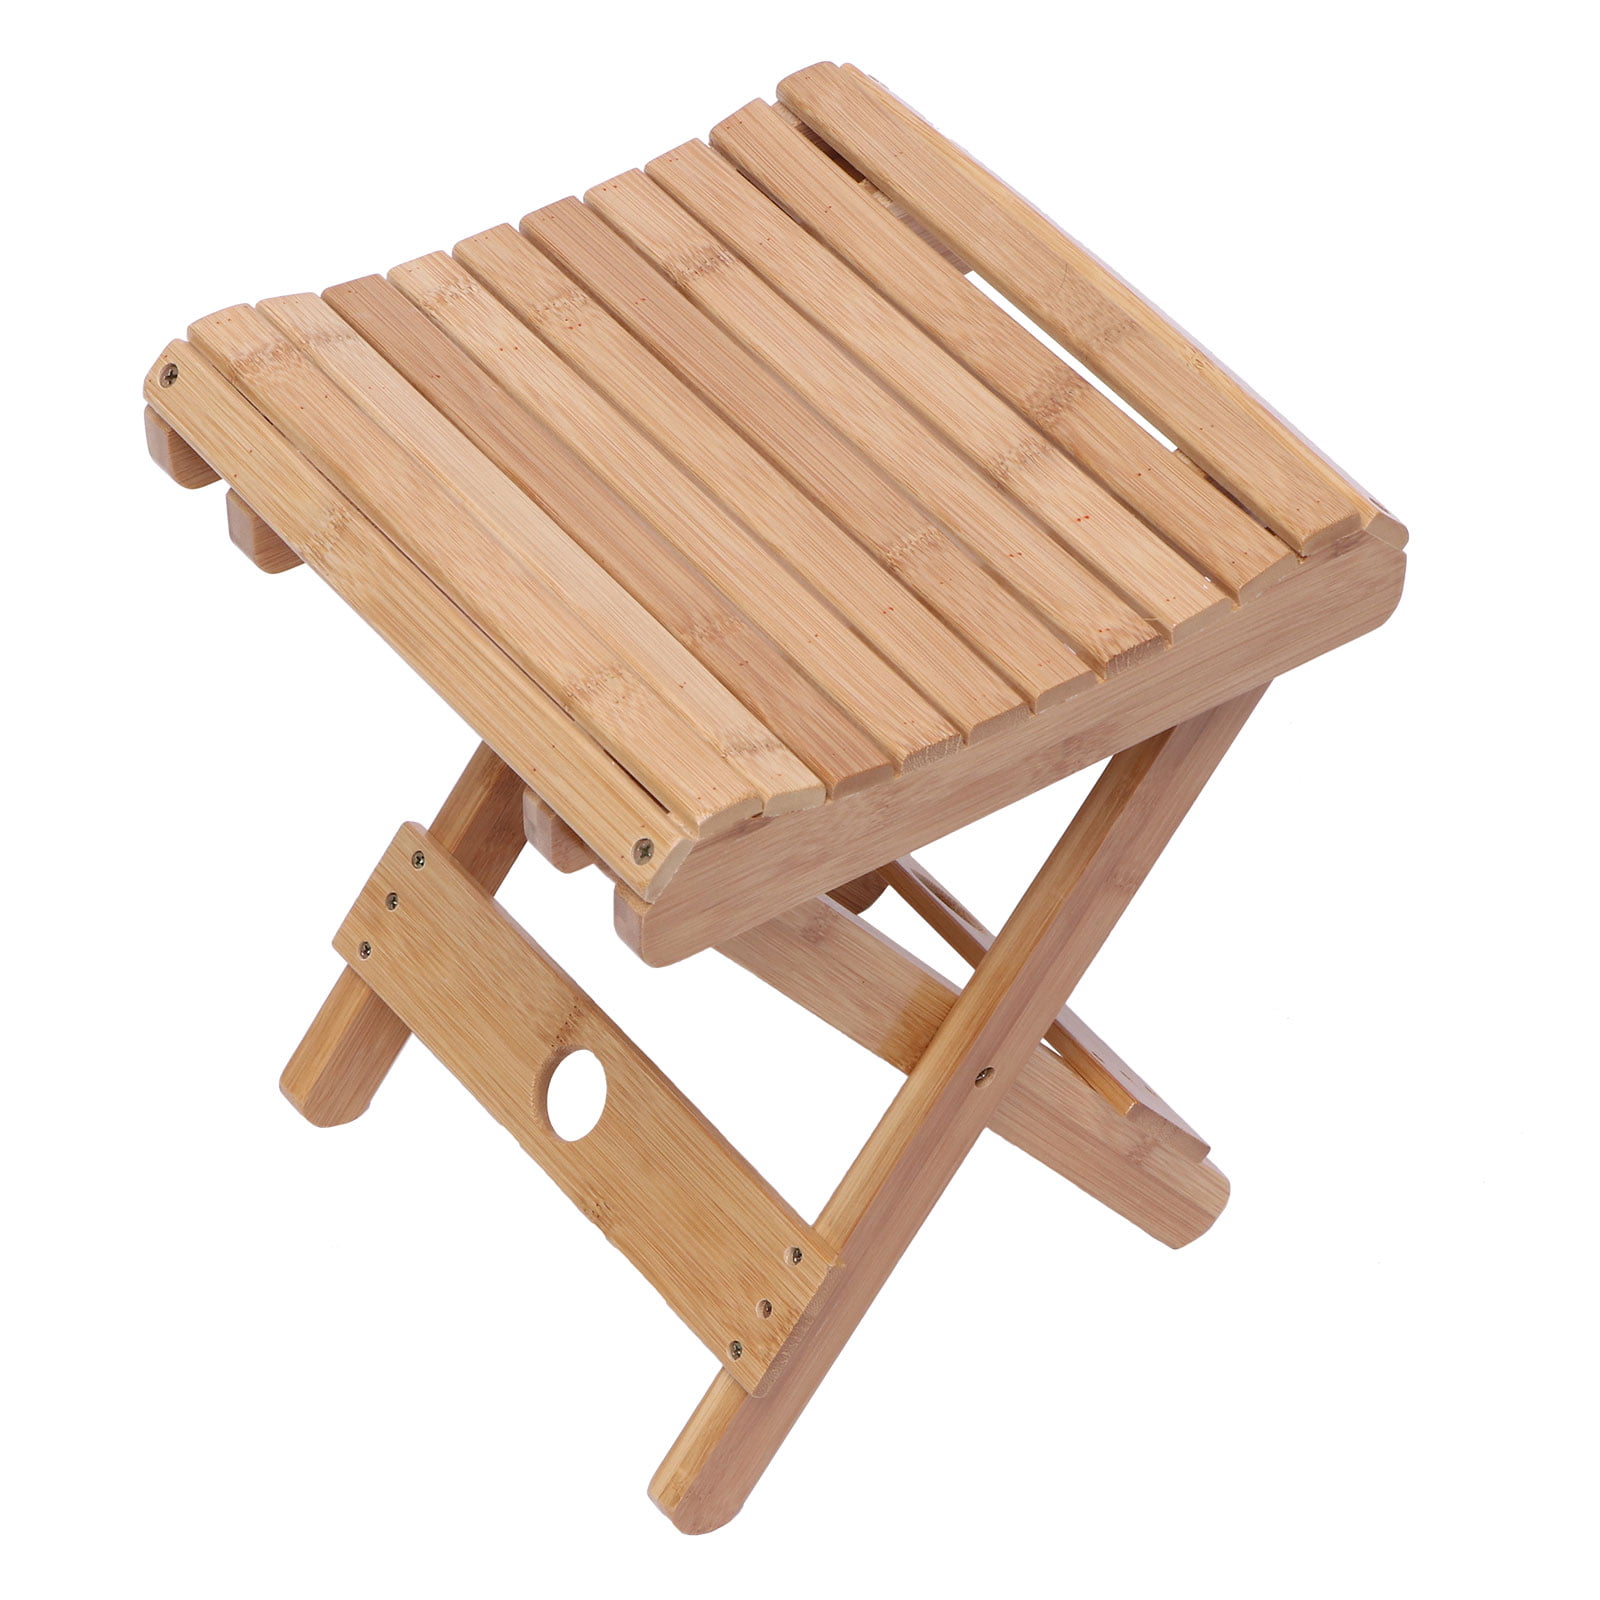 OasisCraft Folding Bamboo Step Stool 200LB Shower Foot Rest for Shaving Legs Fully Assembled Wooden Spa Bath Chair for Adults Kids Portable Shower Chair Foldable Round Seat Wood Natural 